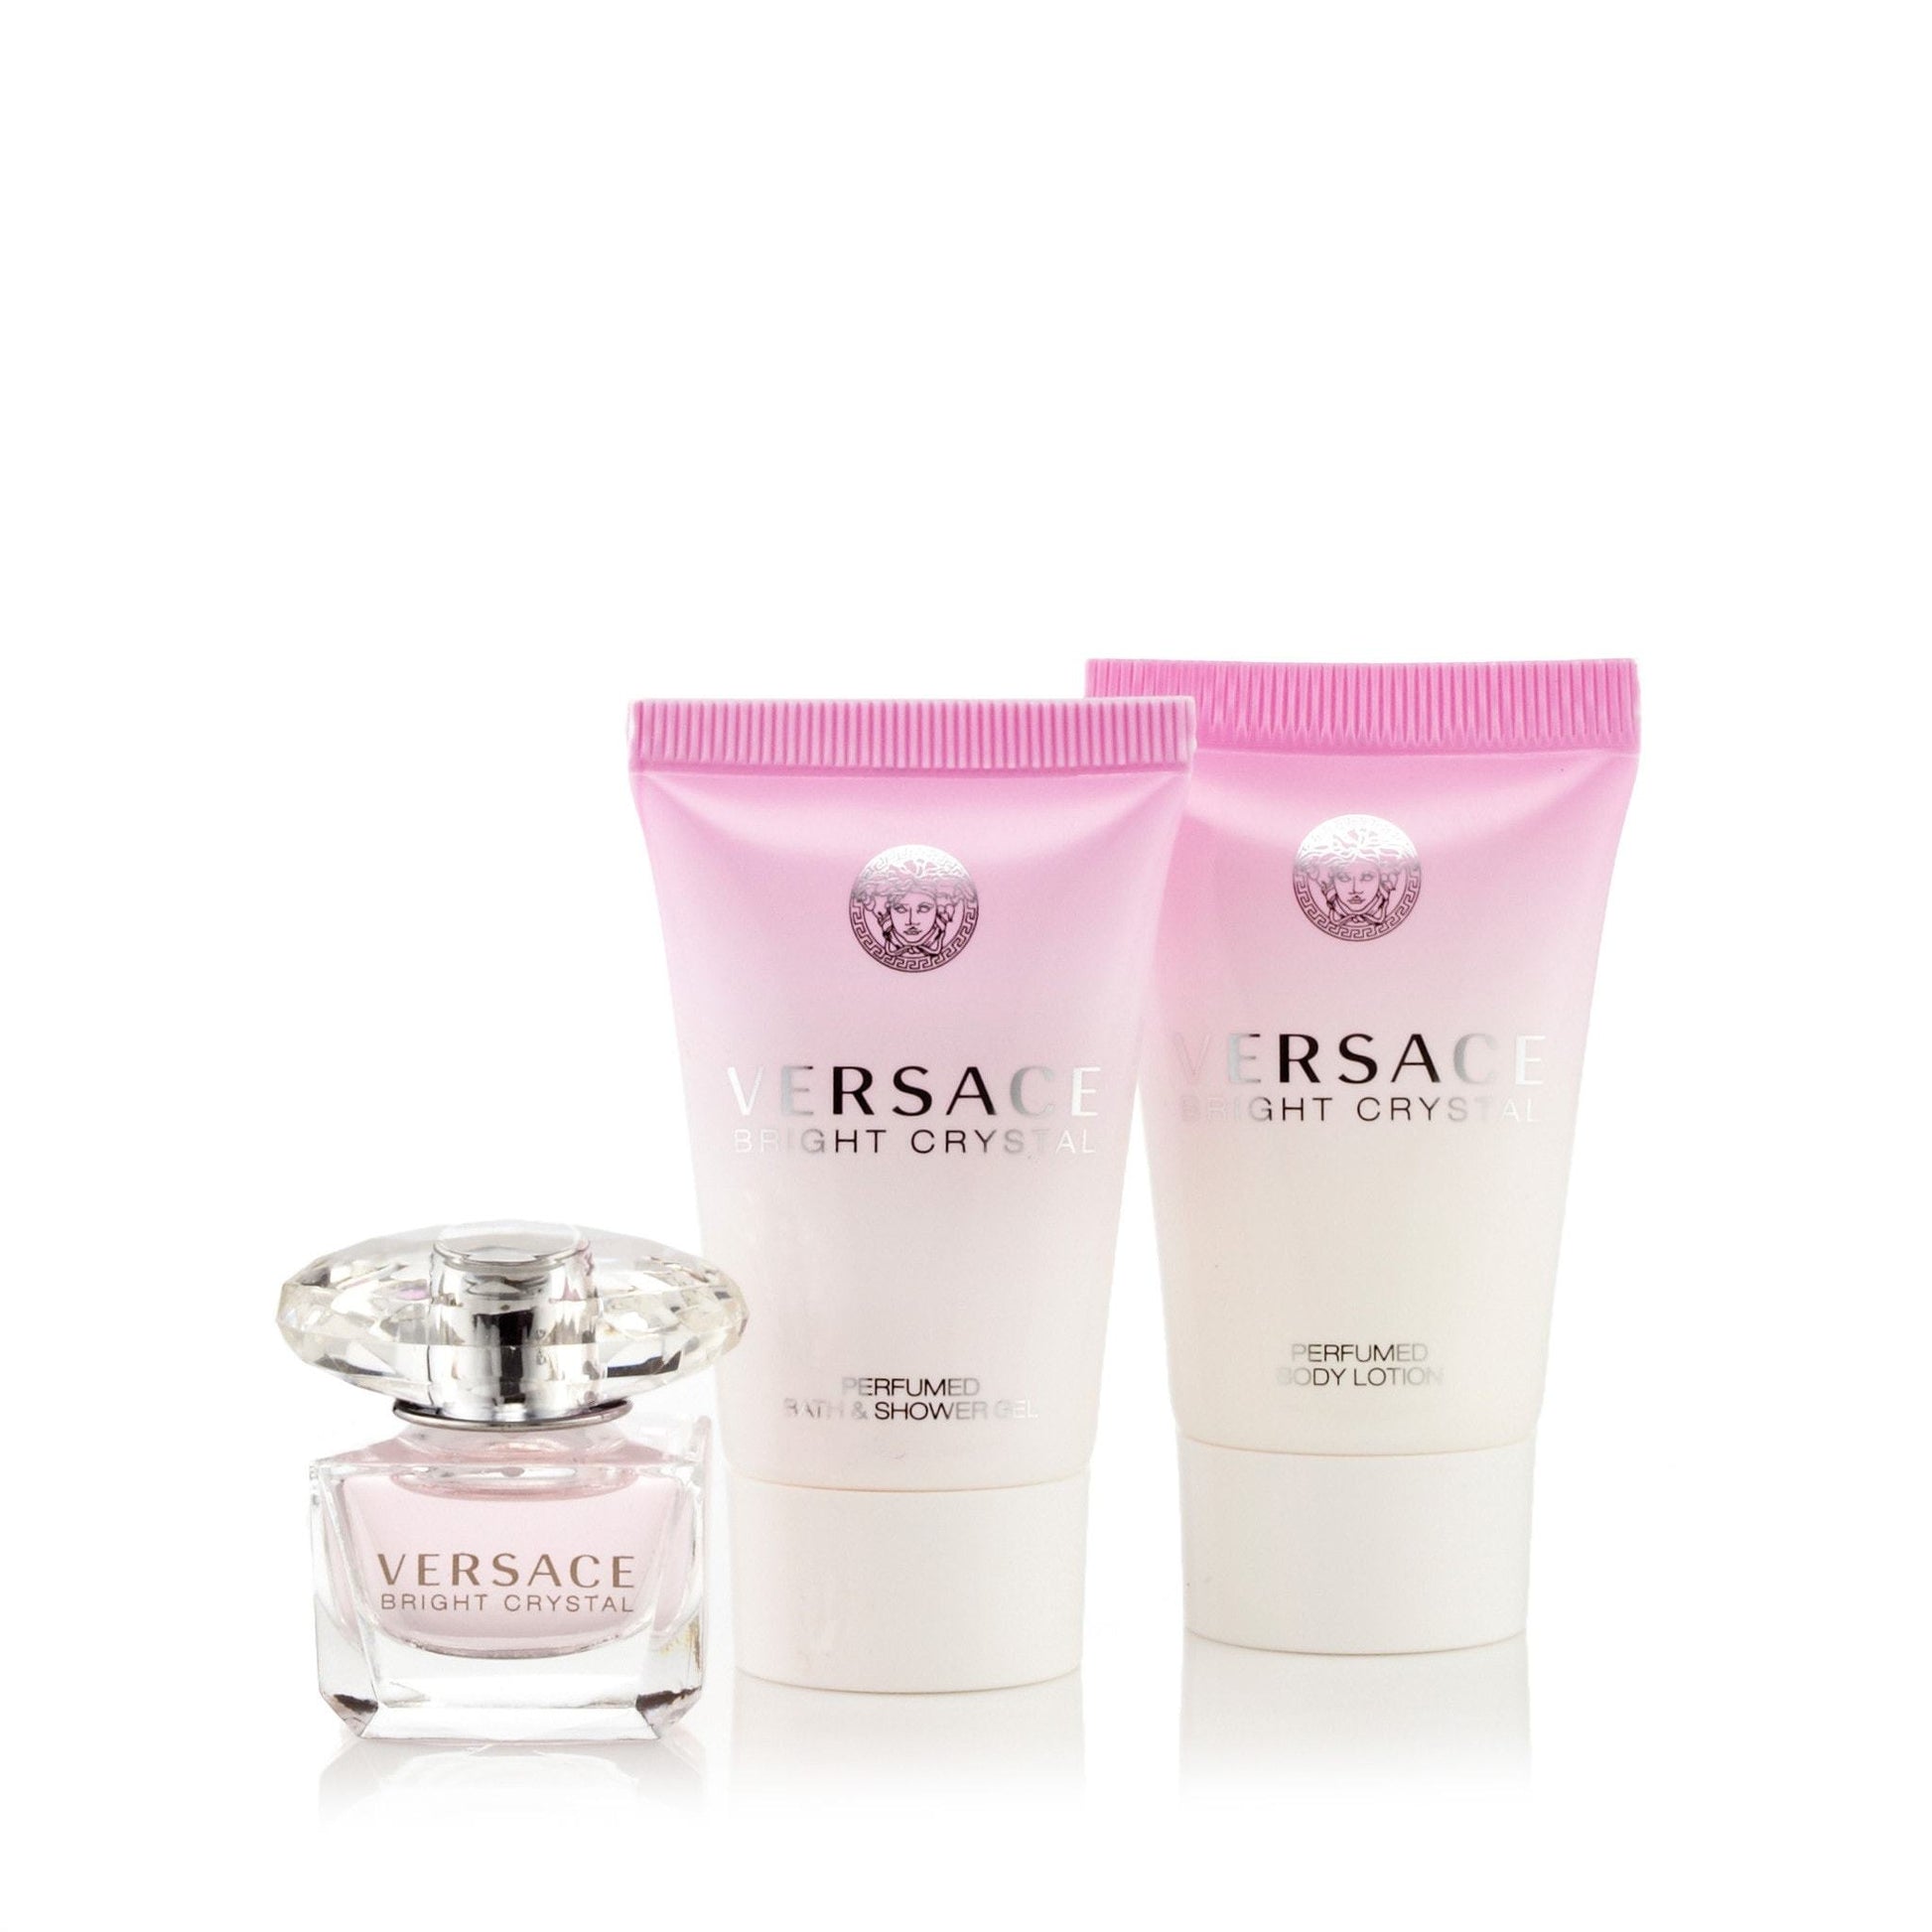 Bright Crystal Gift Set for Women by Versace, Product image 1